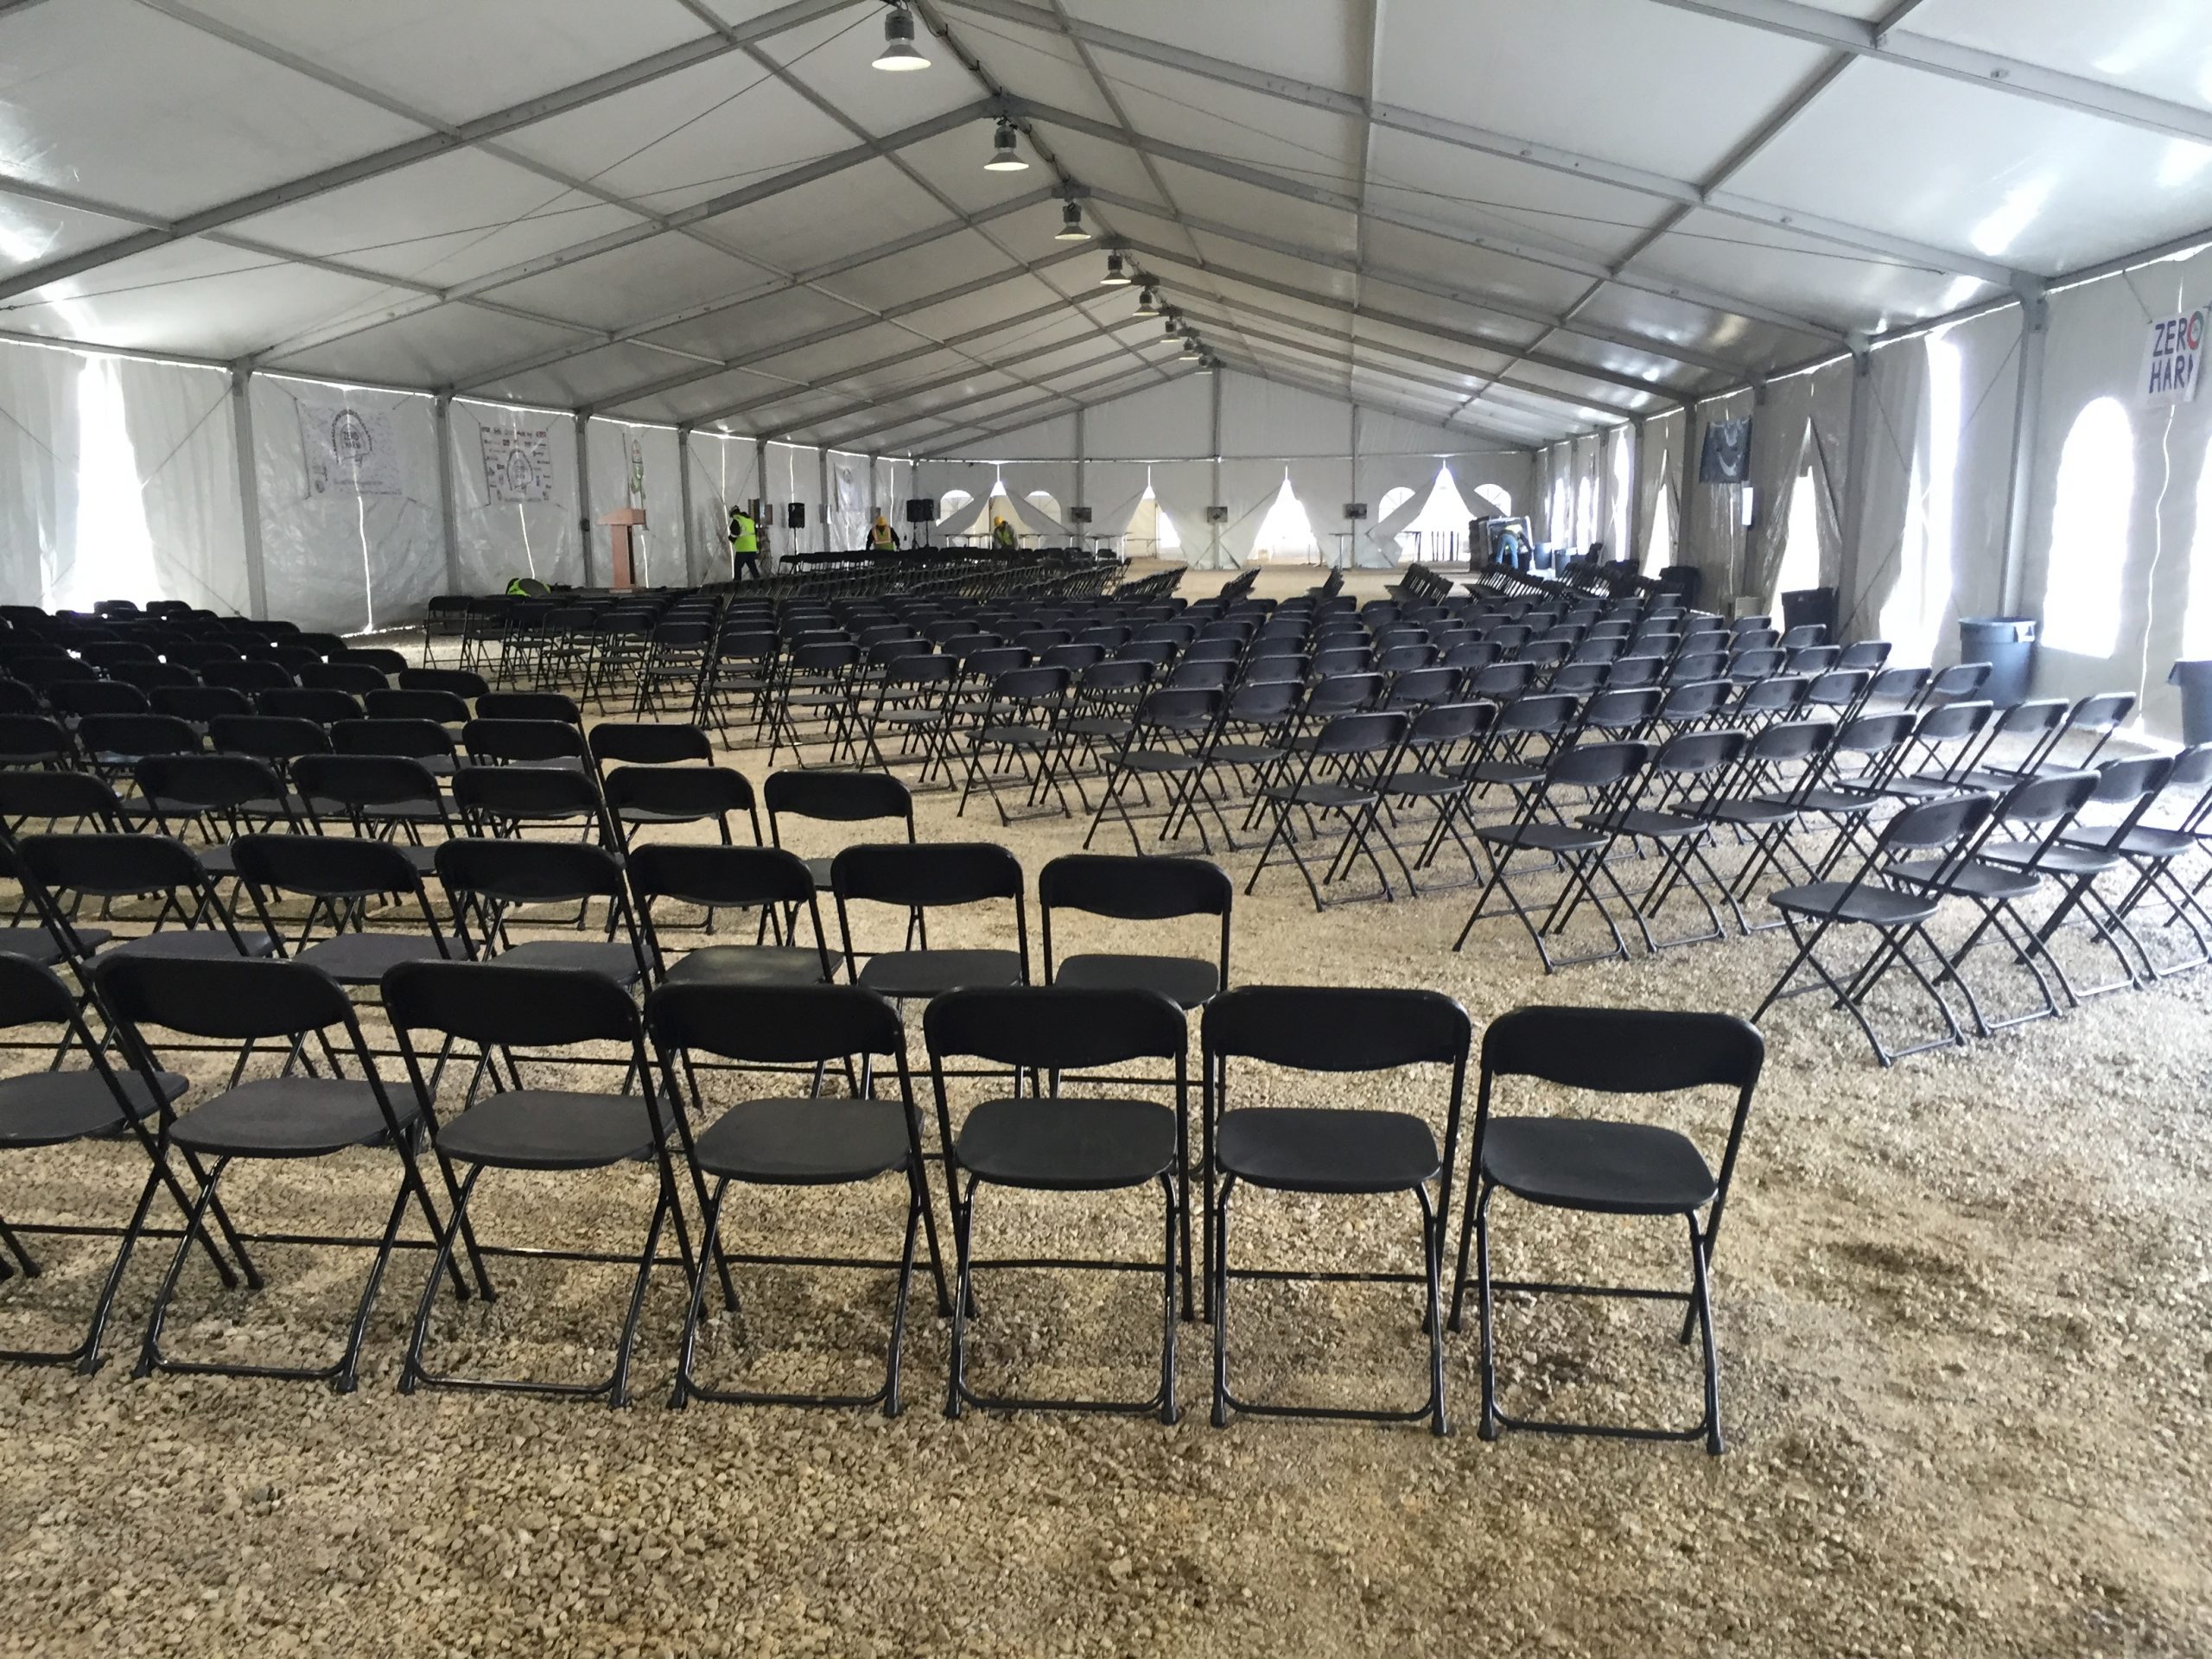 60′ x 197′ Losberger structure setup for KBR safety meeting at the new Alliant Energy power plant in Marshalltown, Iowa